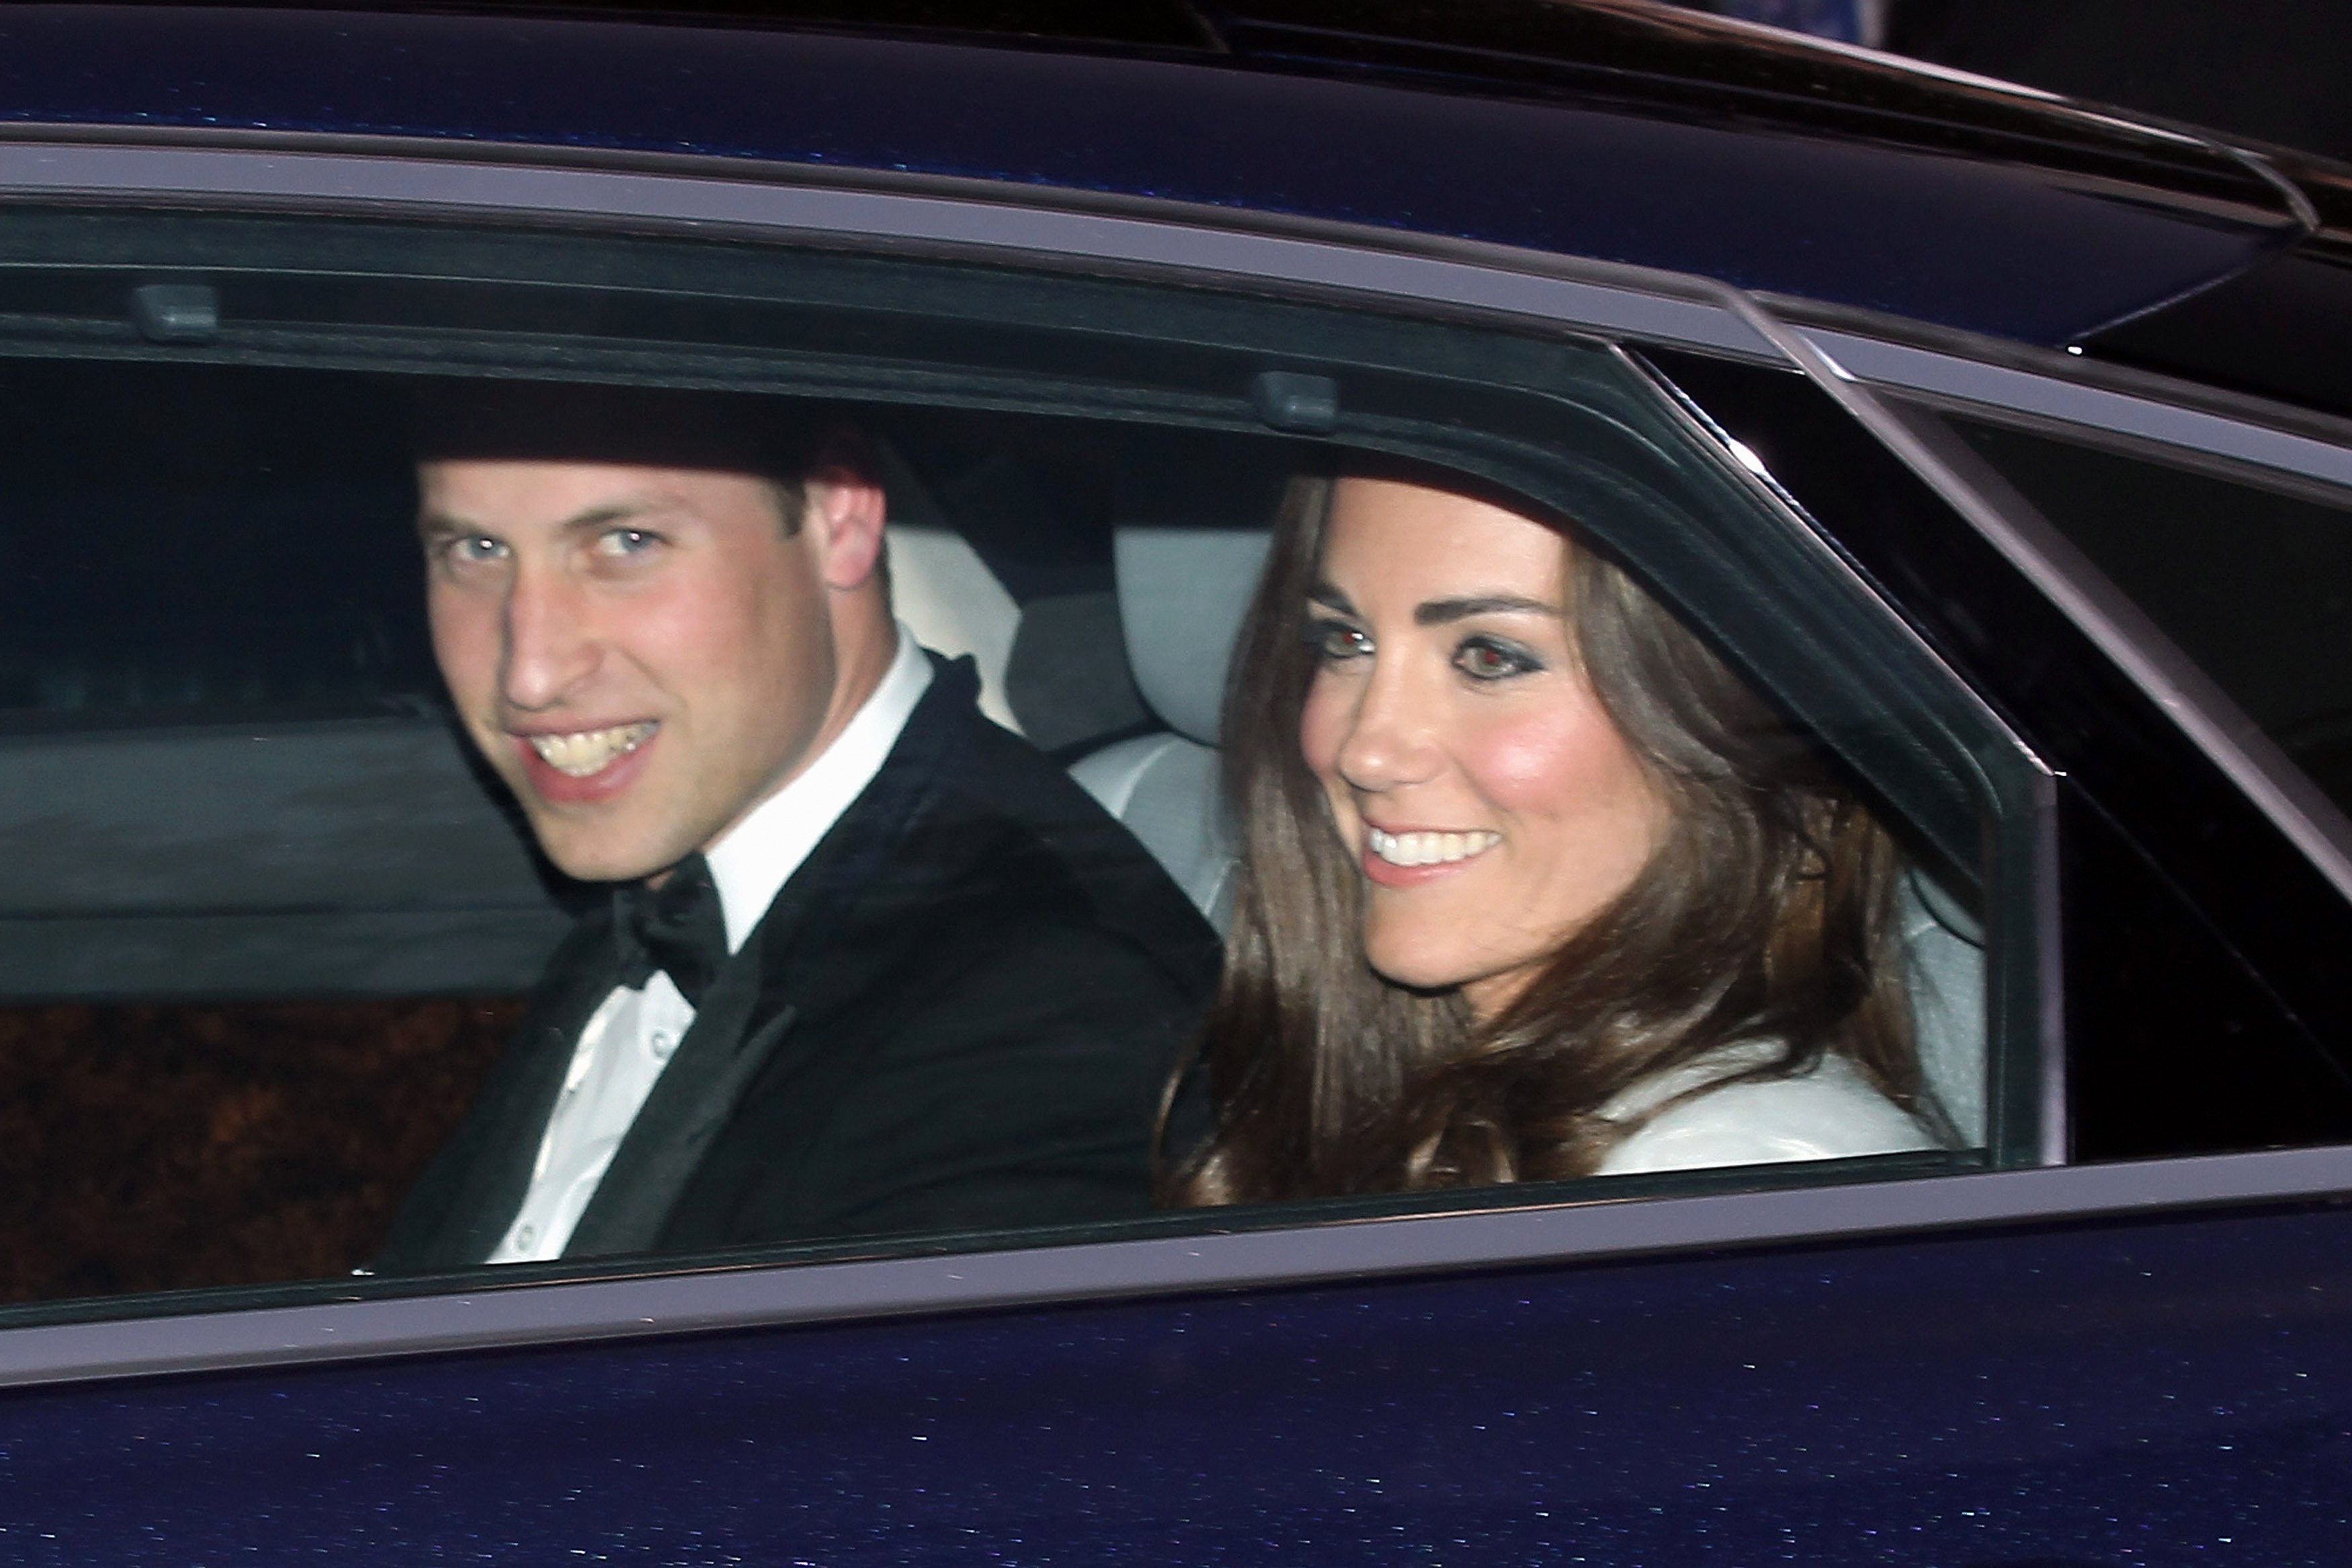 Prince William and Kate Middleton leave Clarence House for Buckingham Palace wedding reception April 29, 2011